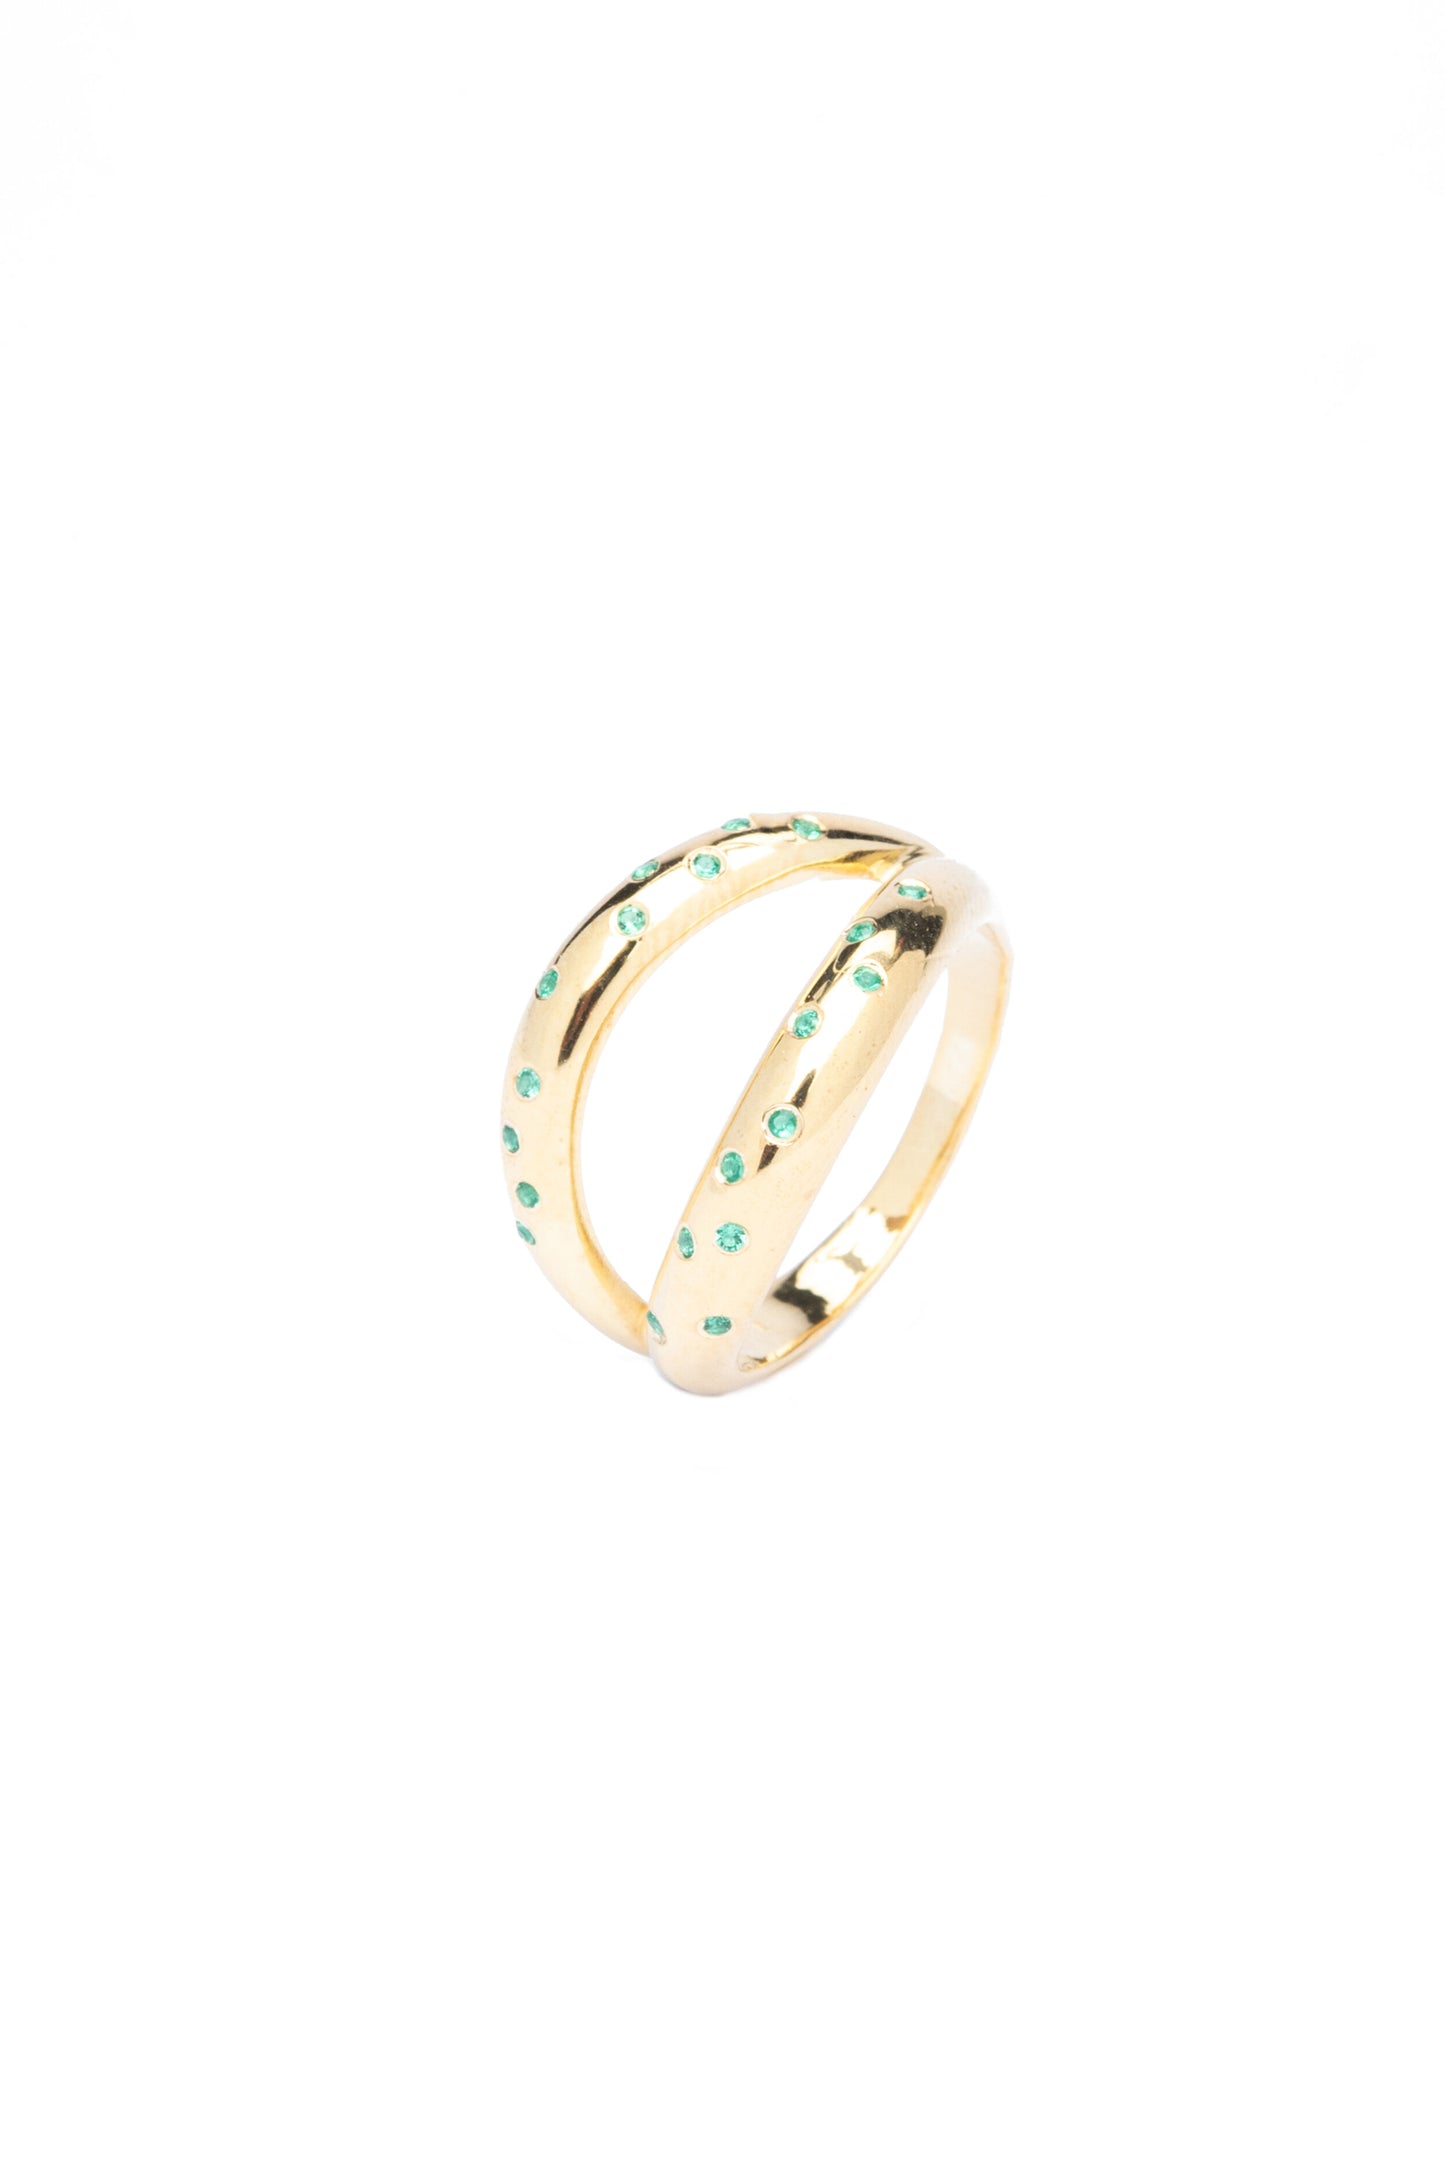 Emerald Stardust Ring - Gold Plated